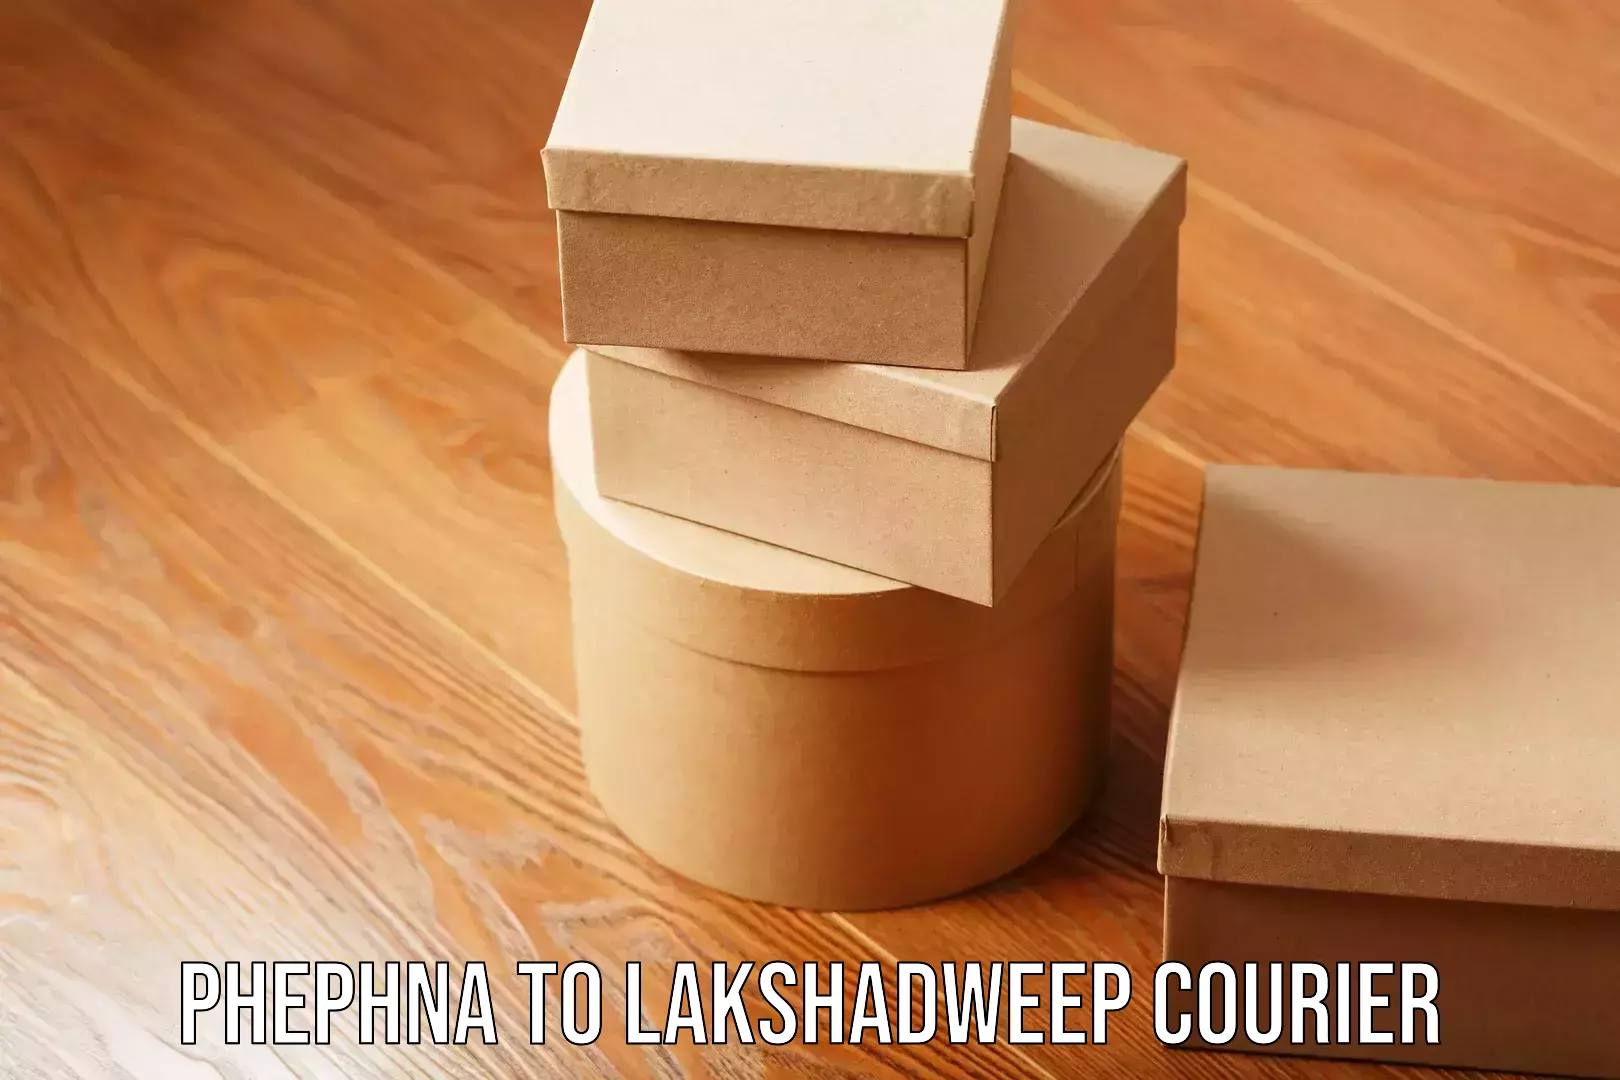 Trusted relocation experts Phephna to Lakshadweep